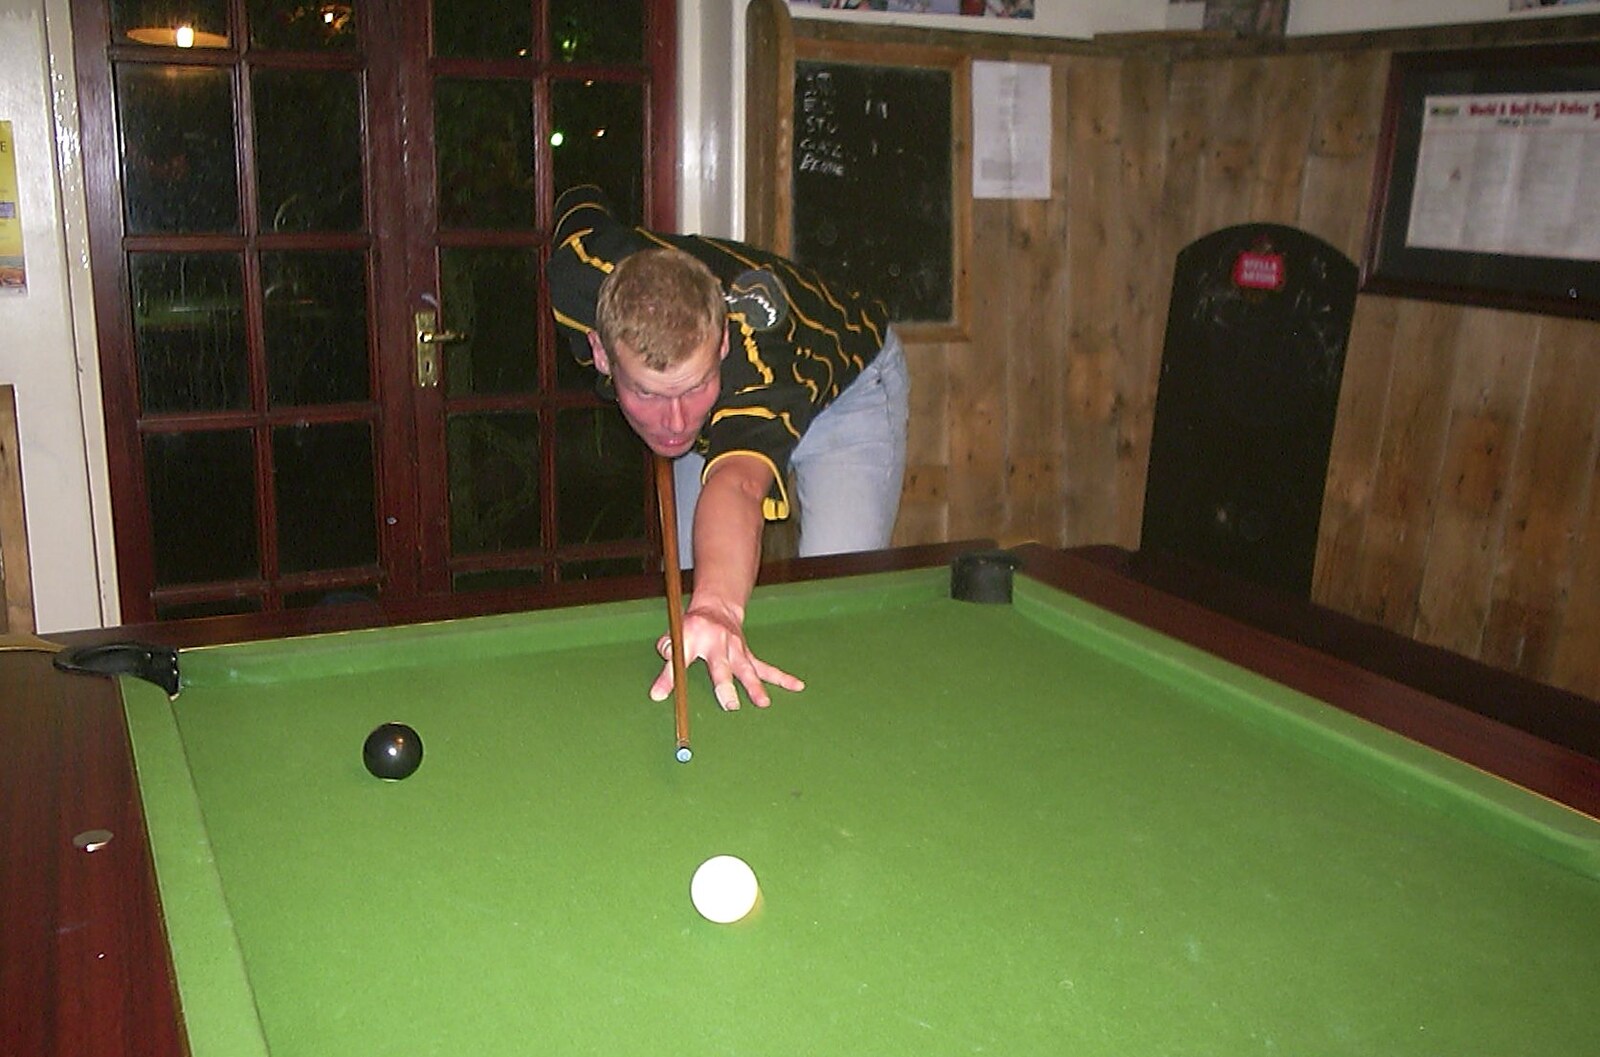 Bill cues up from Paul's Stag Night, Brome, Scole and Bressingham - Friday 20th August 2004